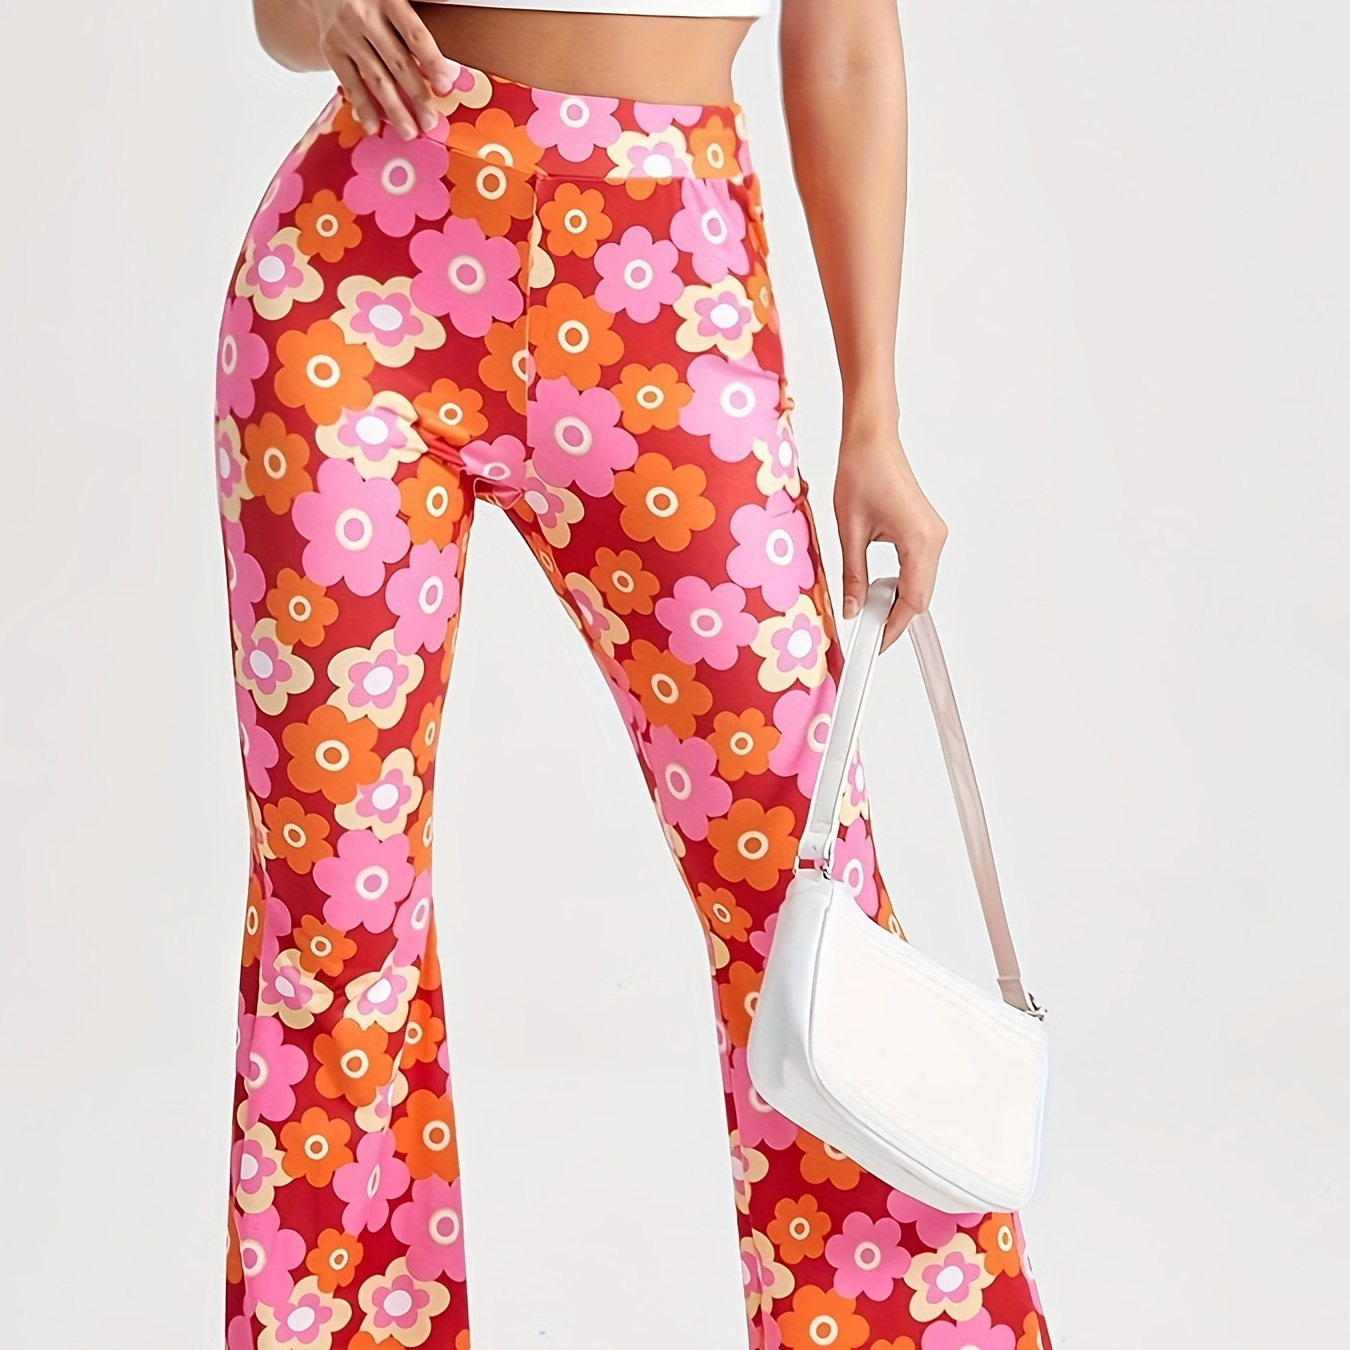 

Floral Print Flare Leg Pants, Casual Forbidden Pants For Spring & Summer, Women's Clothing